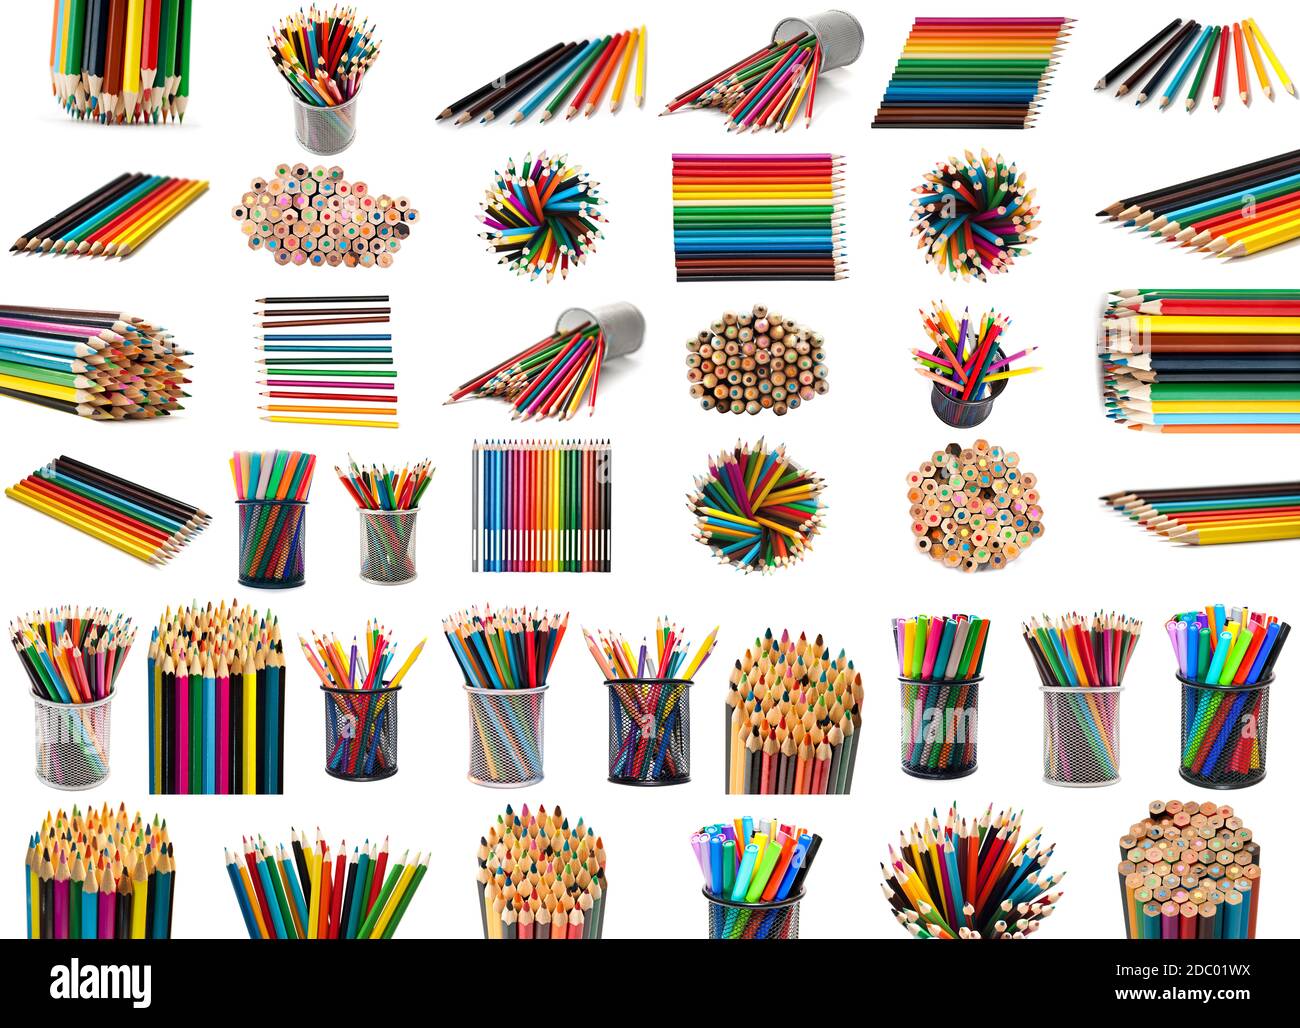 pencils collection isolated on a white background Stock Photo